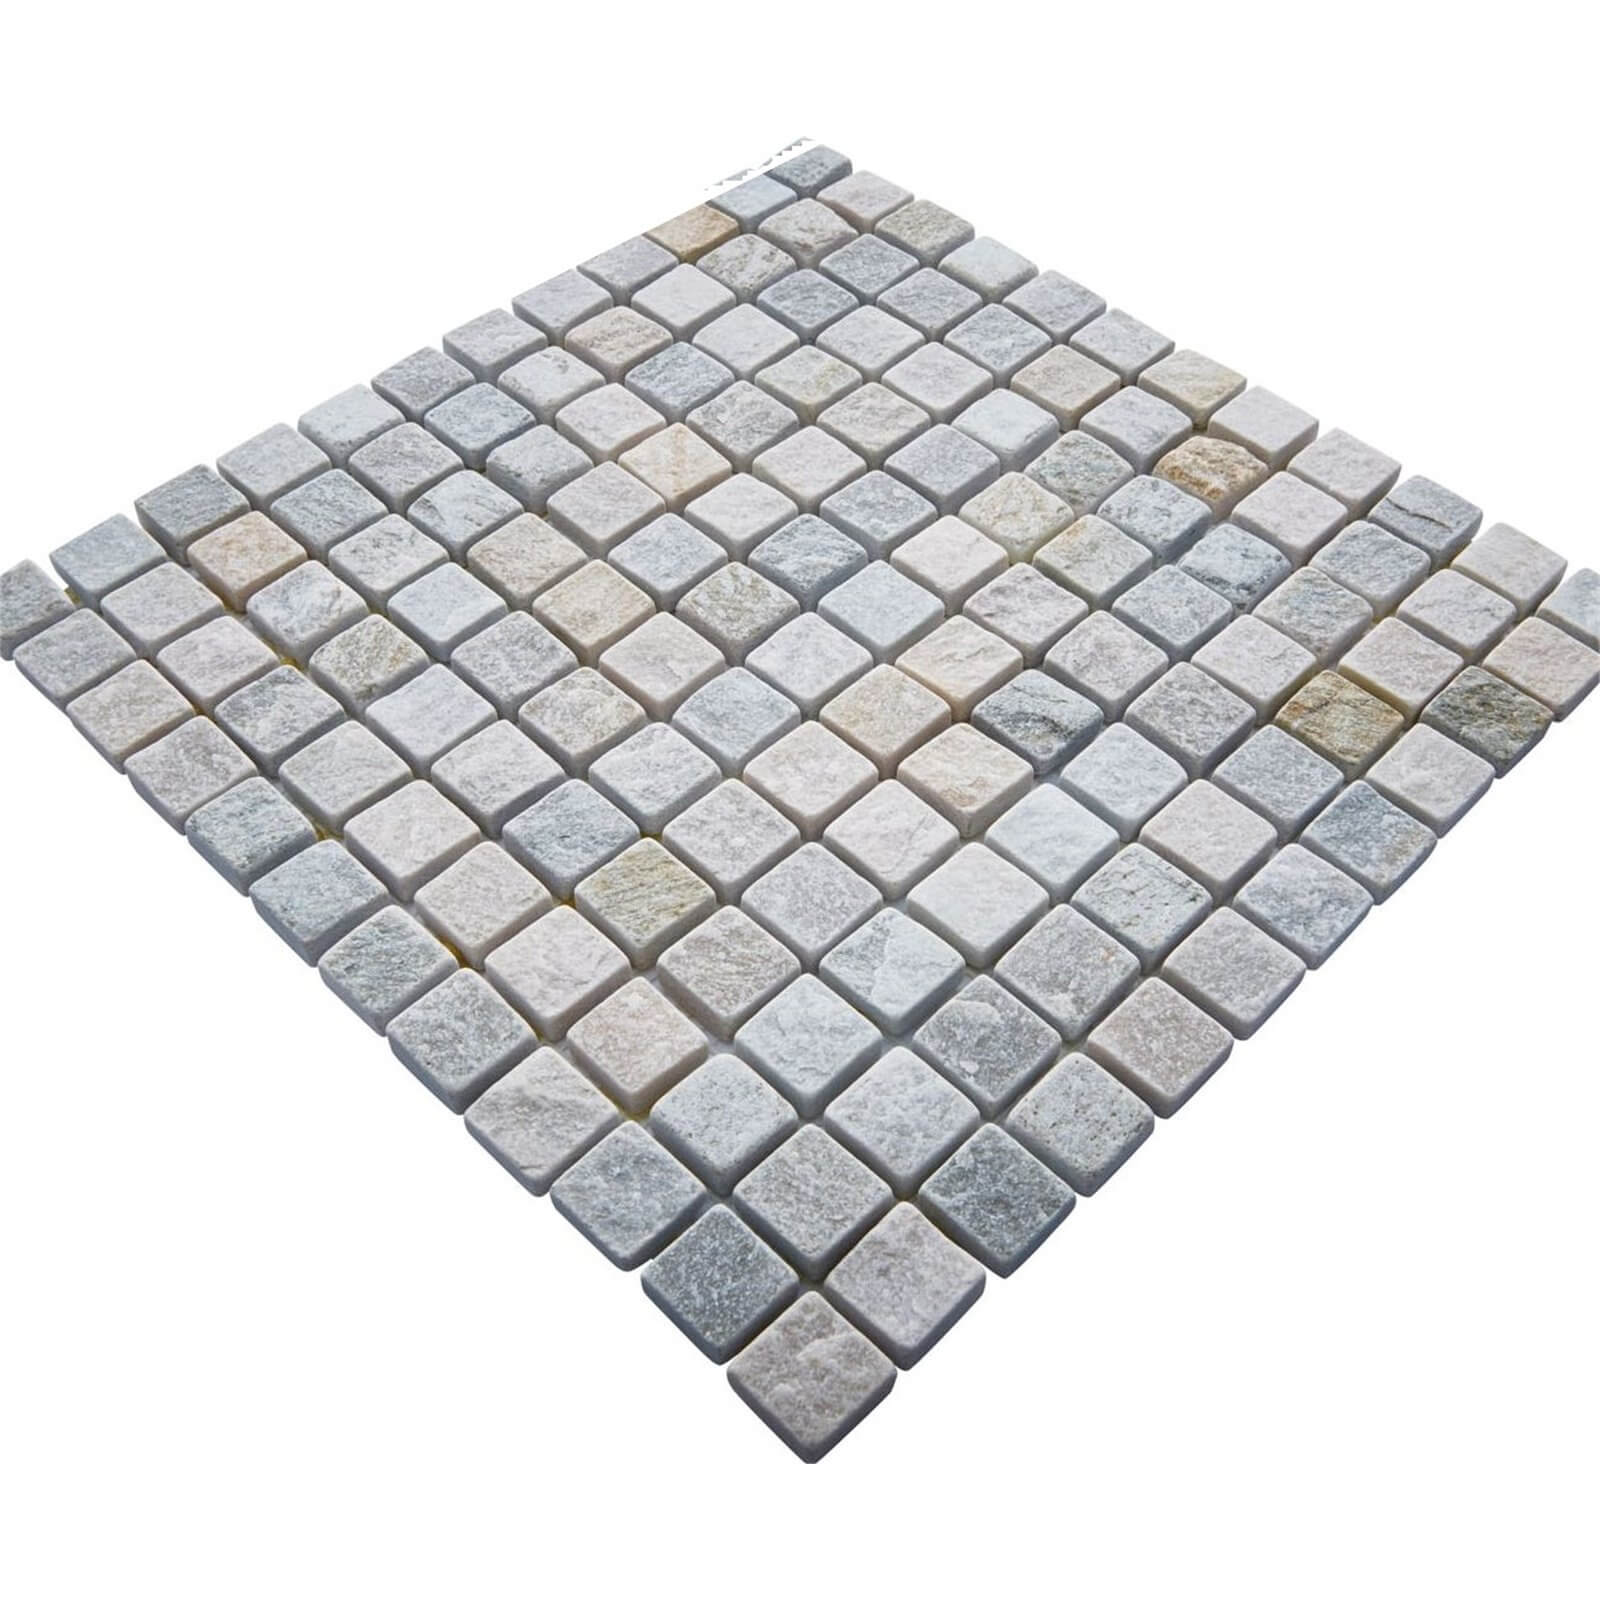 Homelux Oyster Mosaic Tile